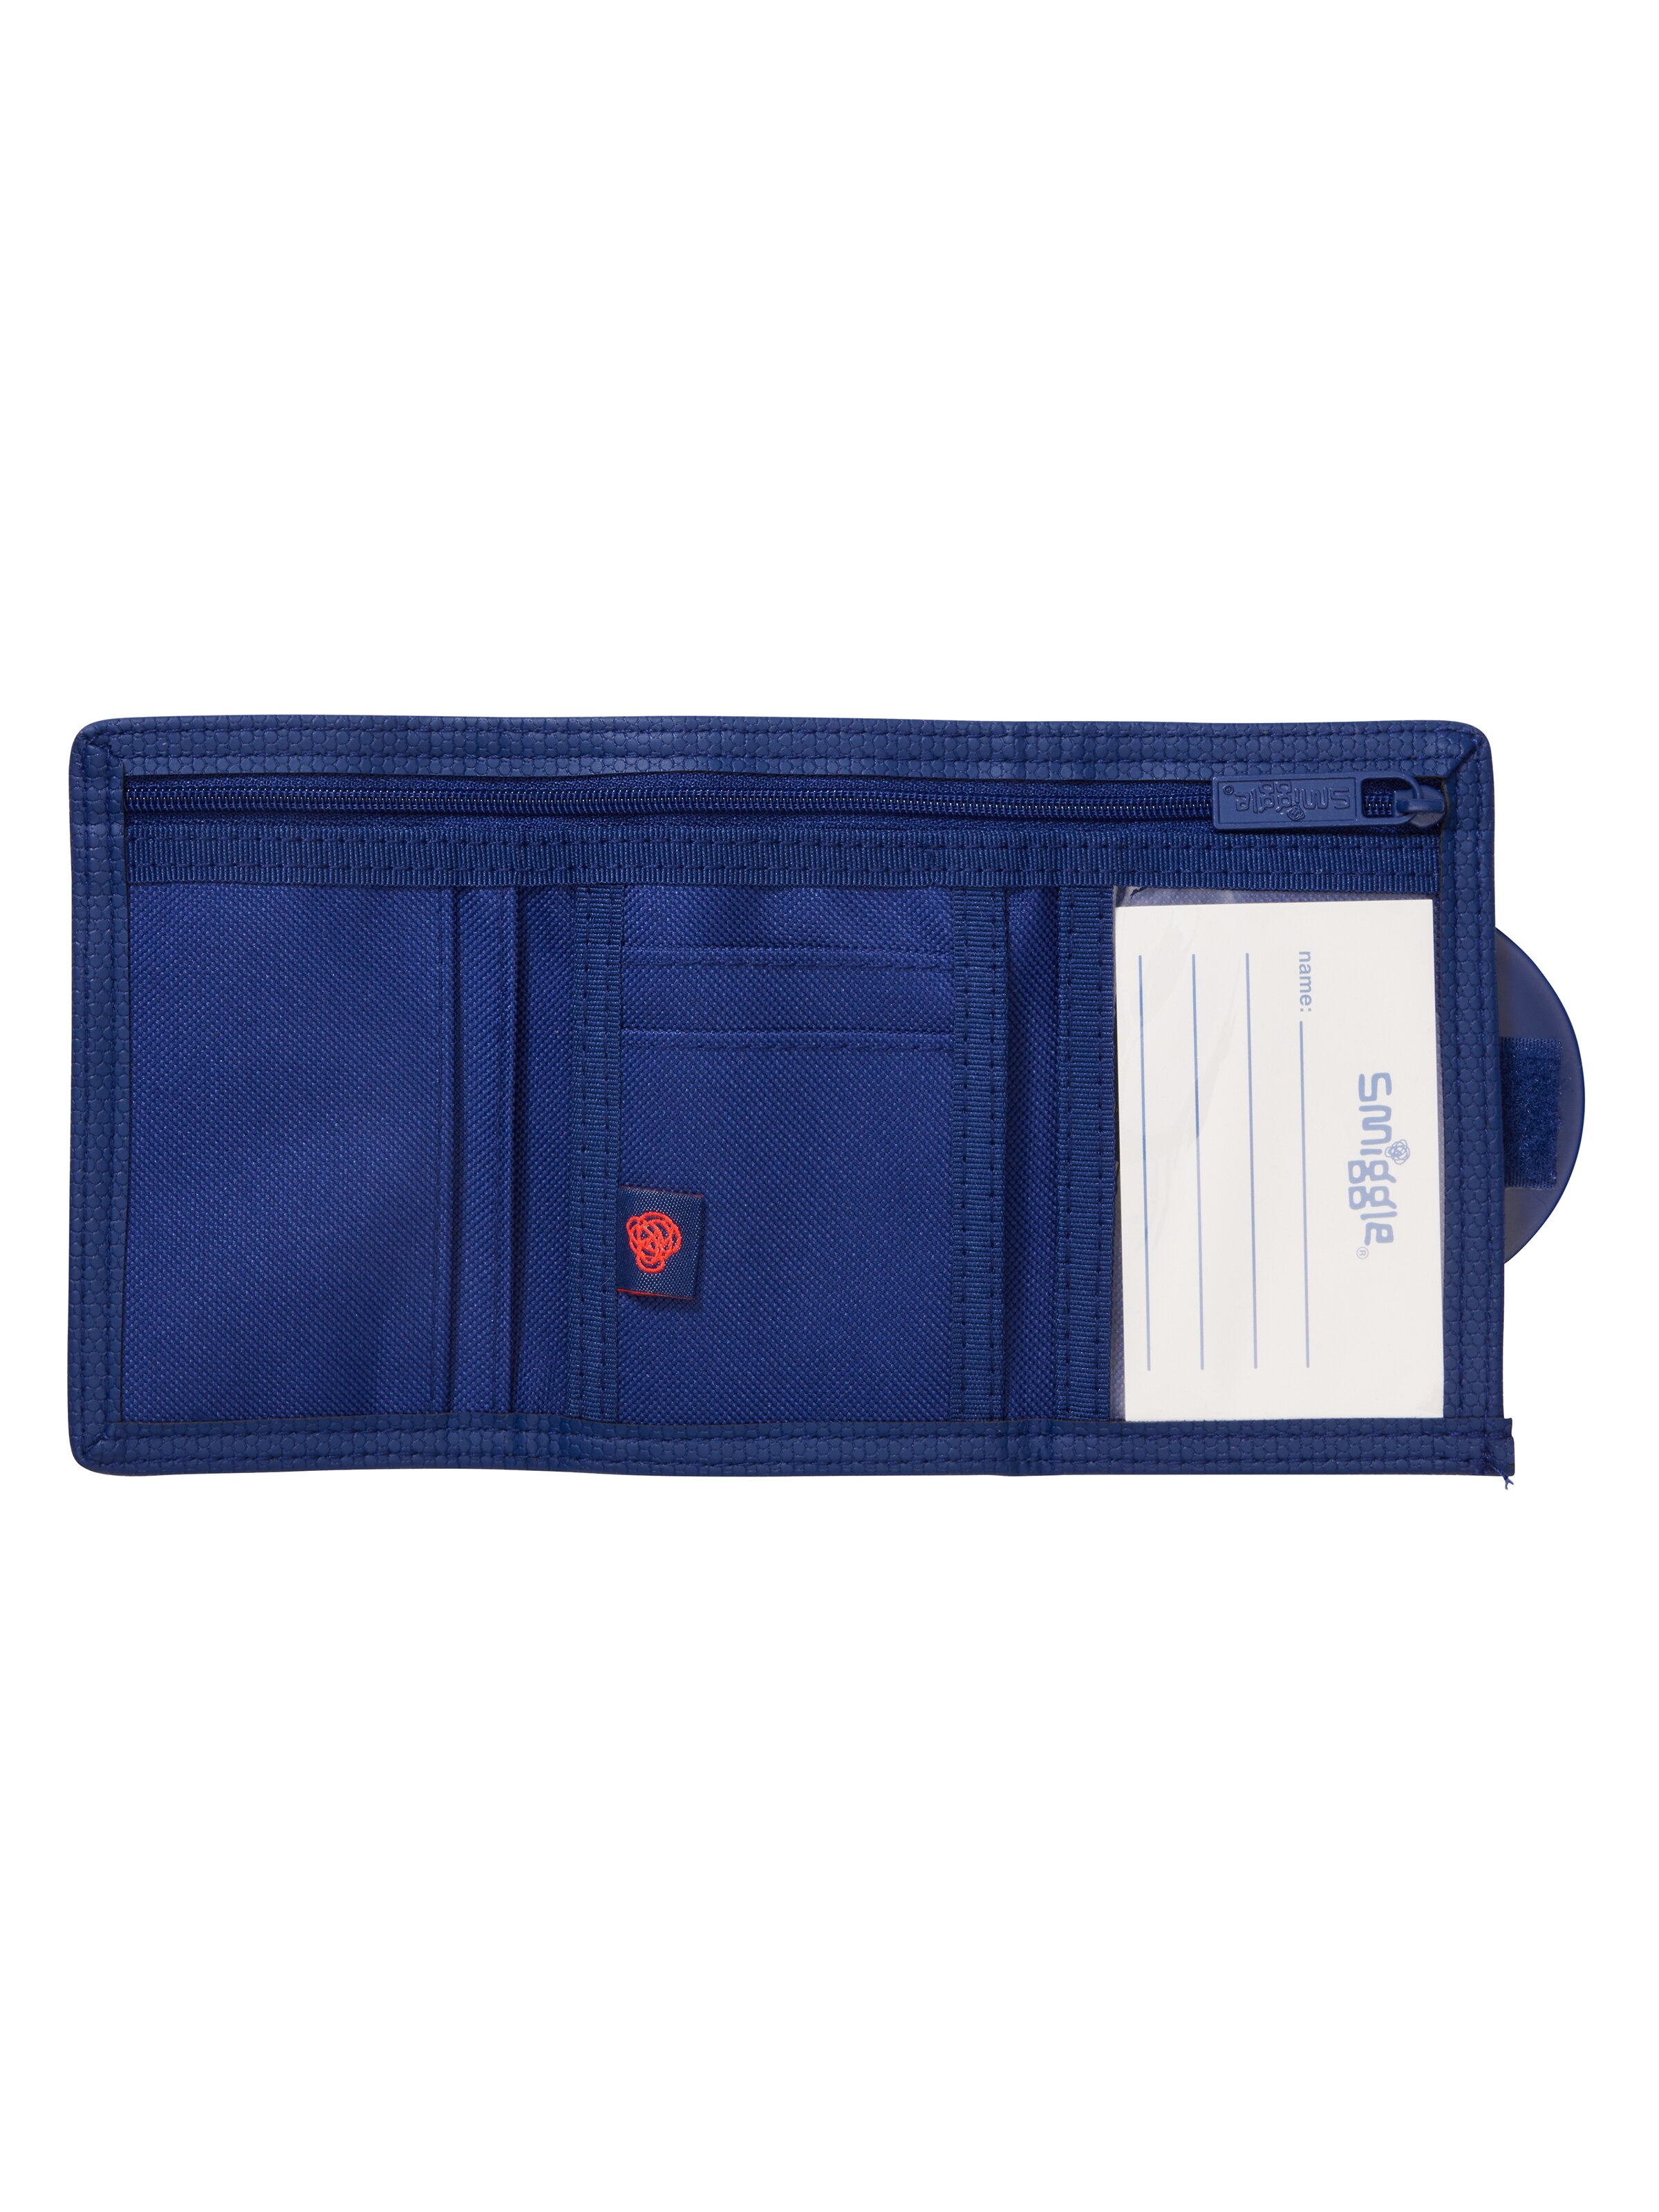 Limitless Character Wallet